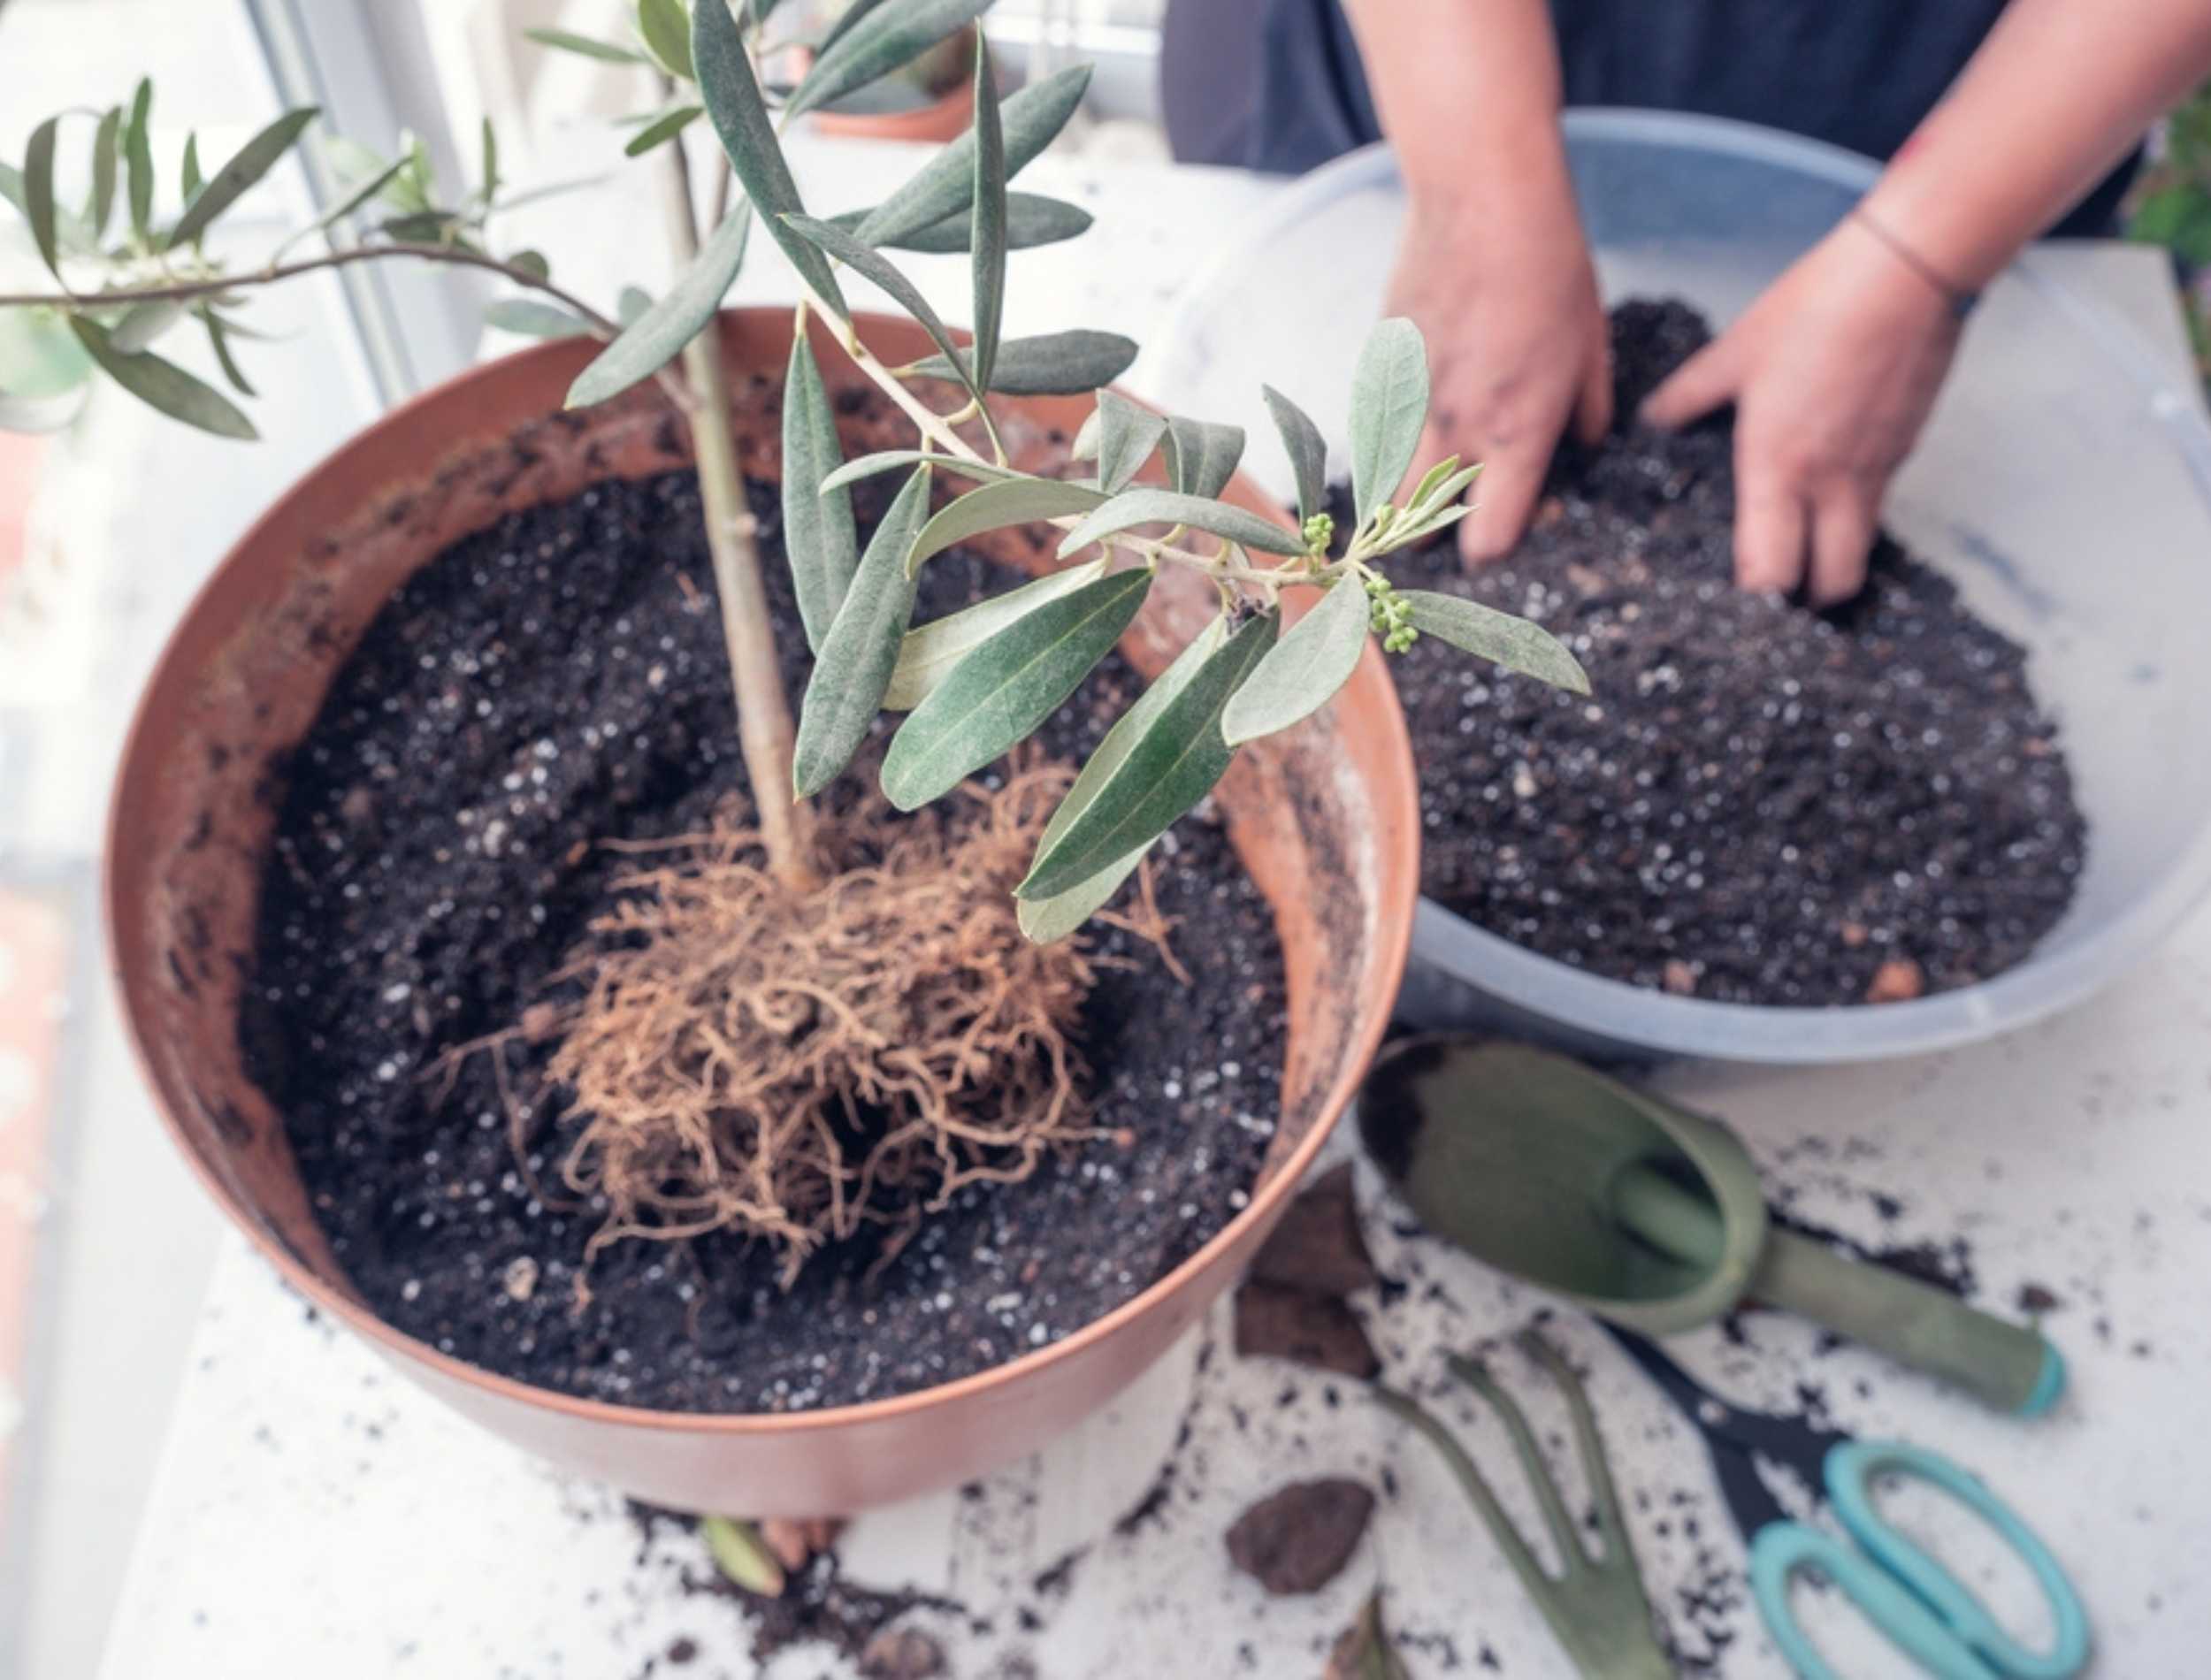 Woman caring for houseplants in spring planting an olive tree sapling in a larger pot